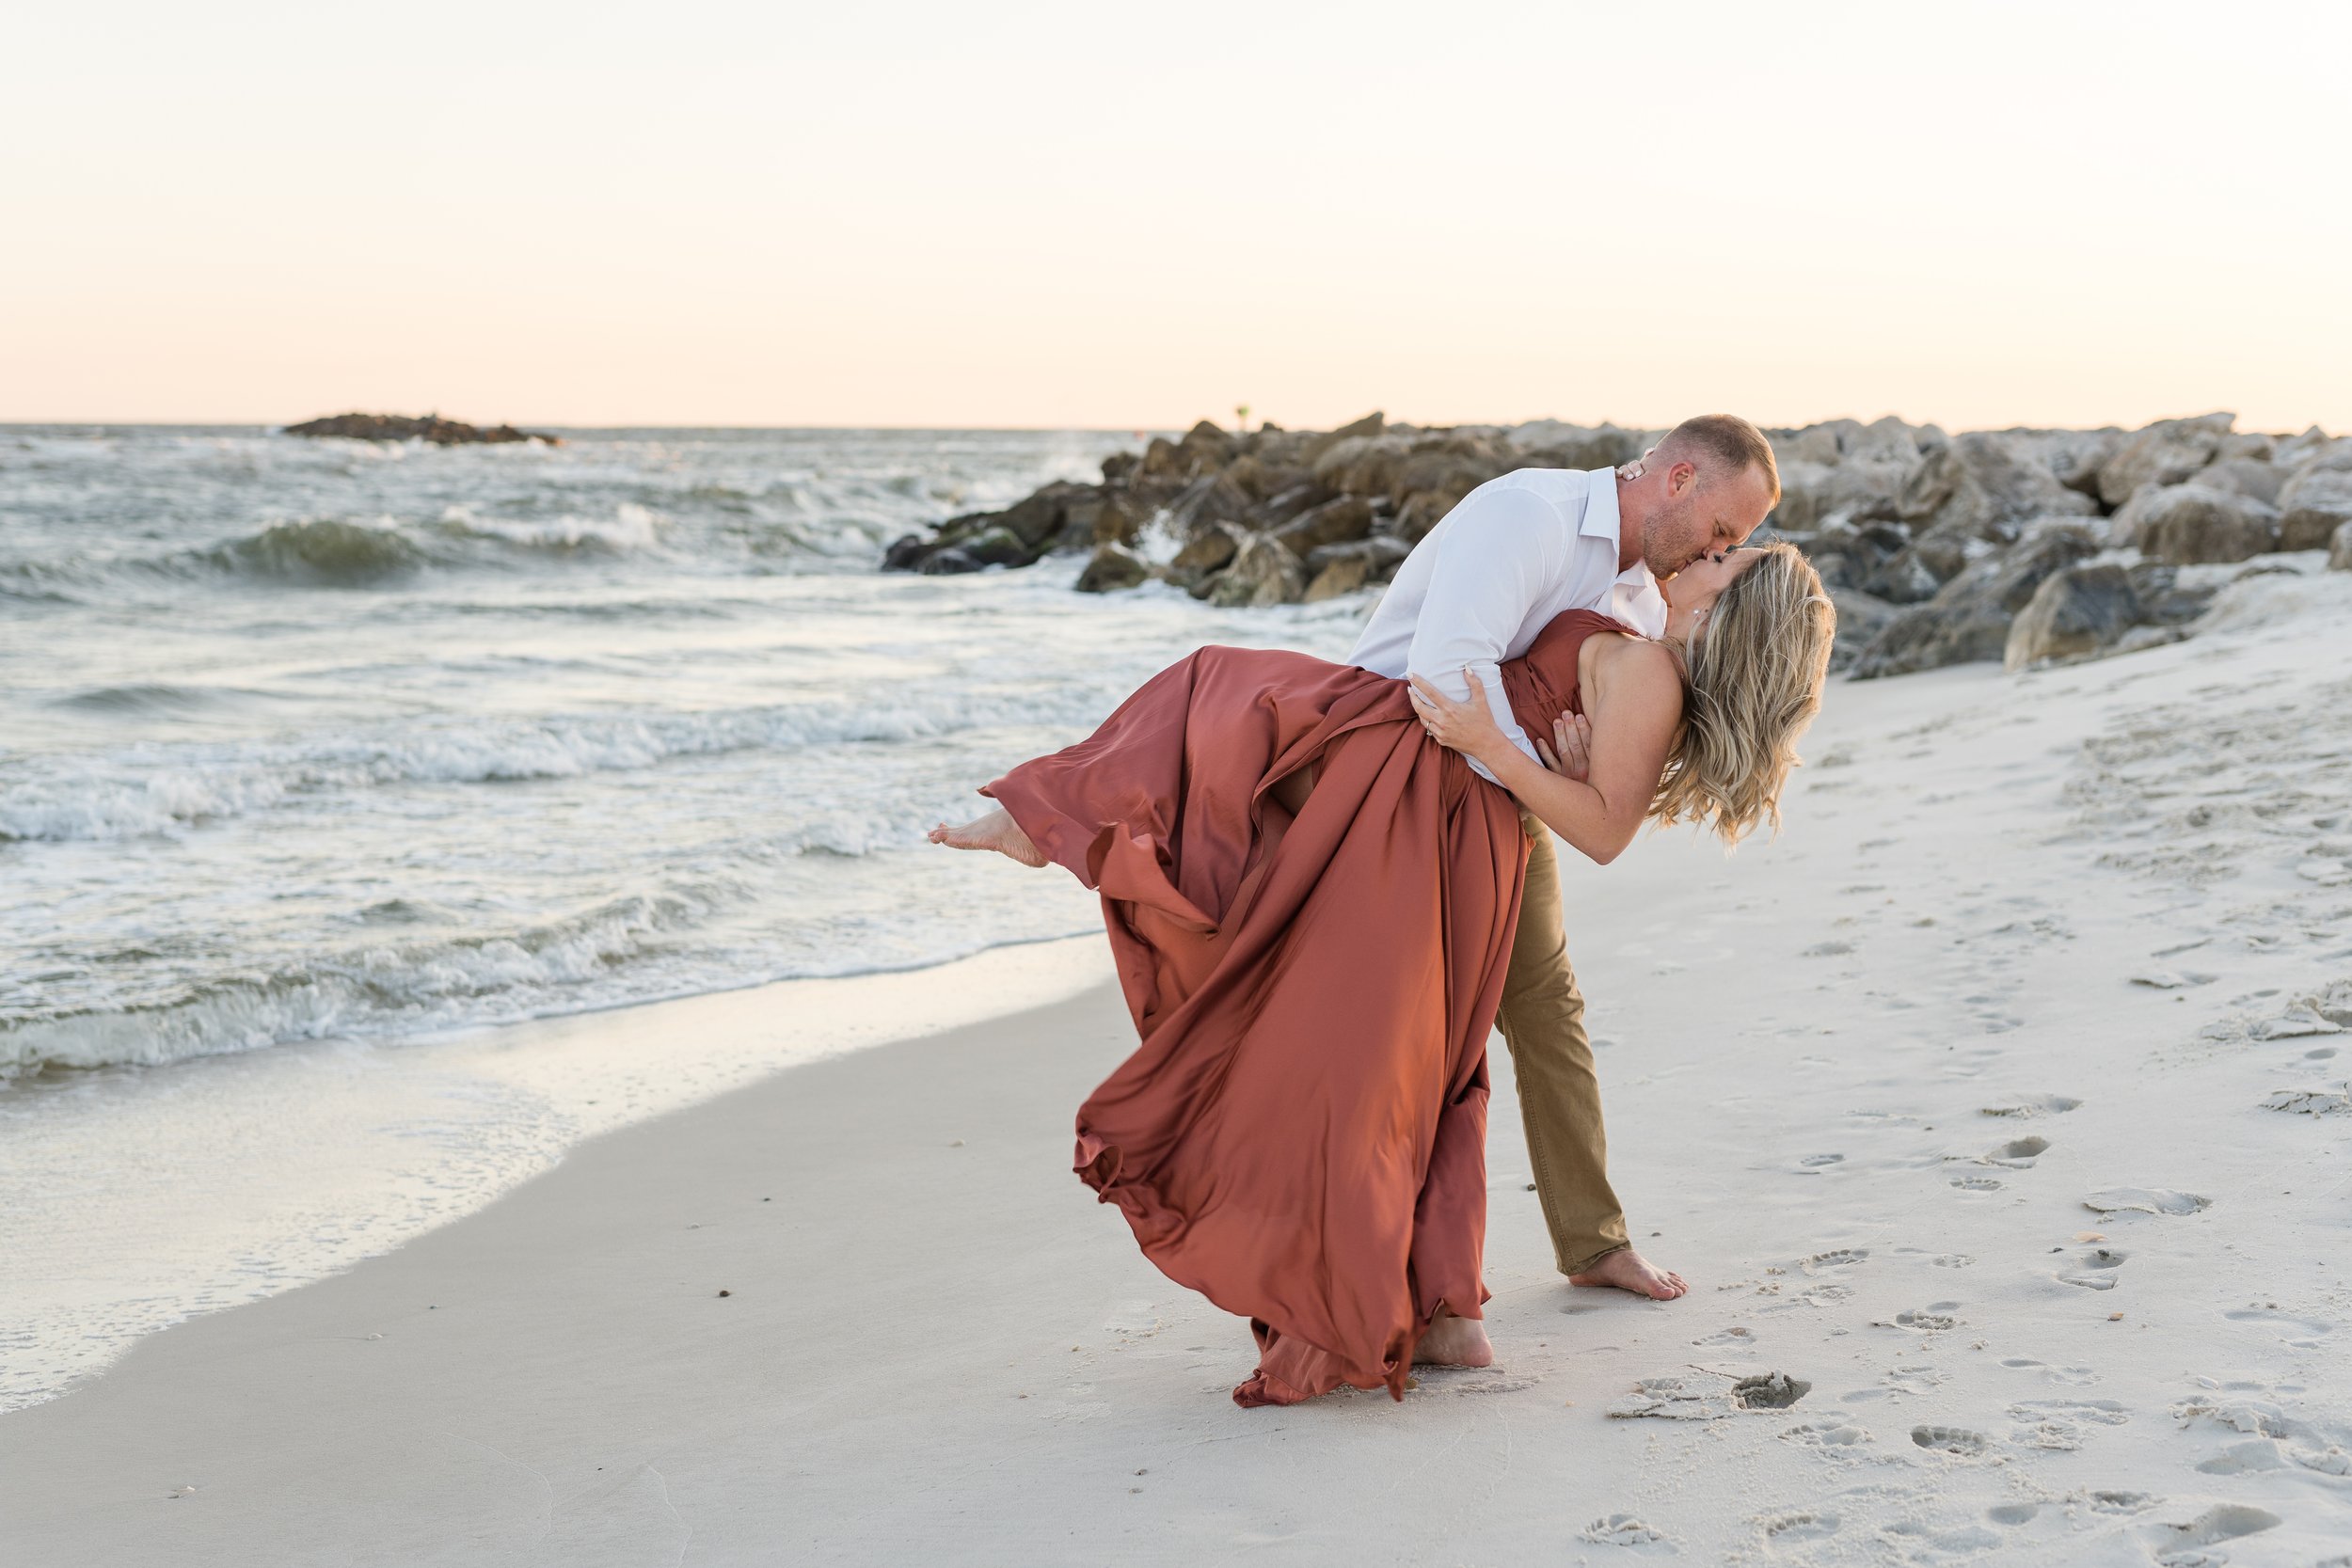 Orange Beach Alabama (The Pass Beach) Engagement Photoshoot Session Photographed by Kristen Marcus Photography during golden hour